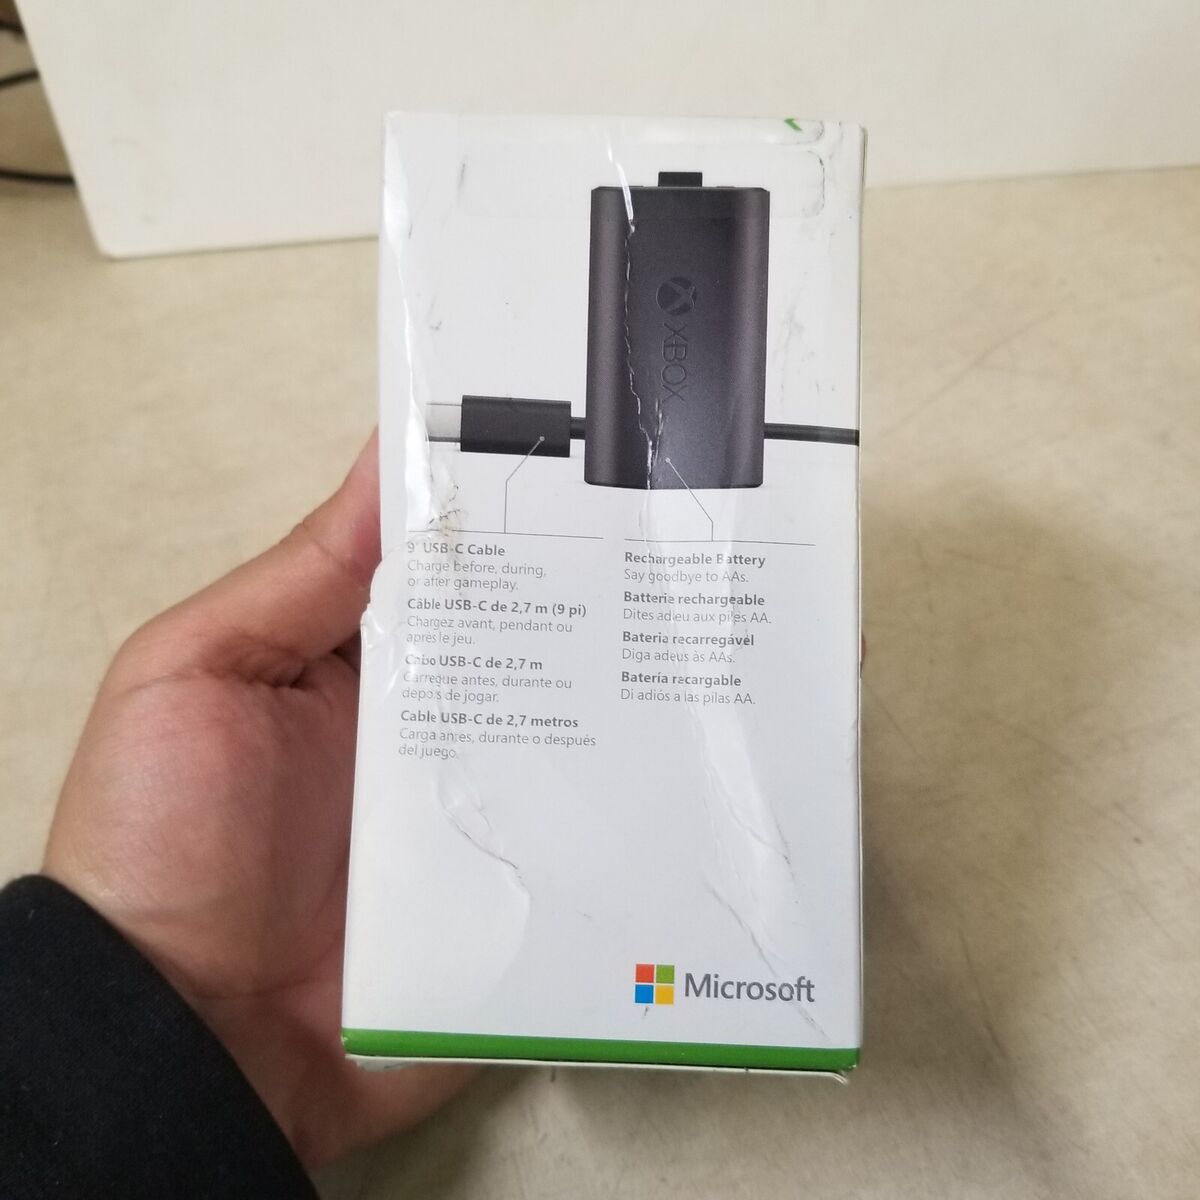 MICROSOFT XBOX 1727 SXW-00001 RECHARGEABLE BATTERY W/ USB-C CABLE